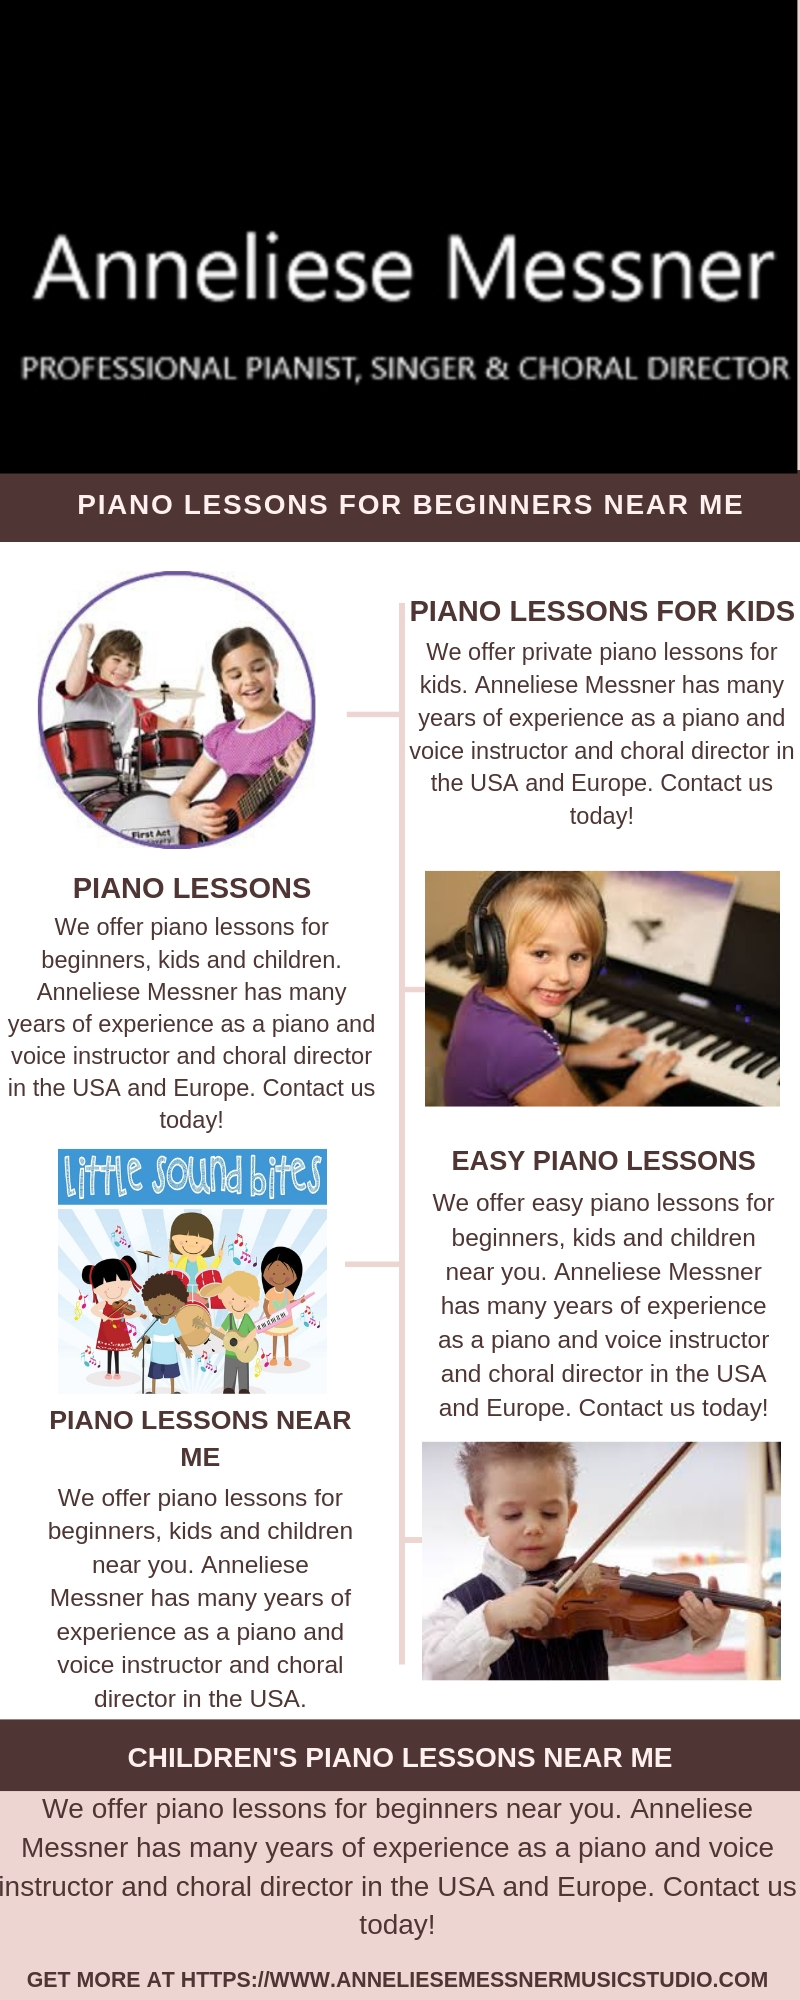 Piano Lessons for Beginners.jpg  by Musiclessonss